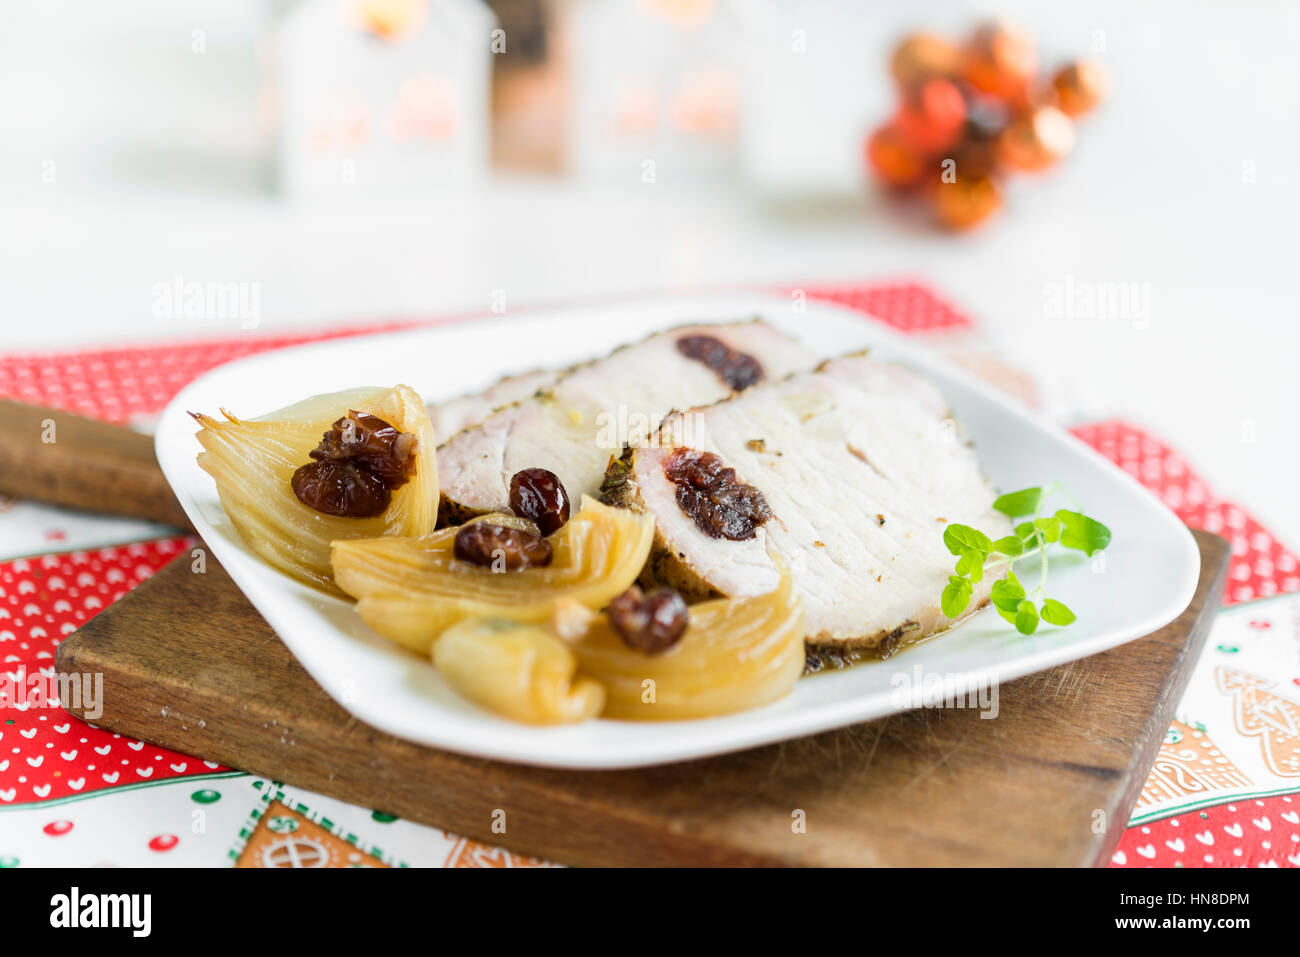 Slices of roasted pork chops stuffed with cranberries and garlic with cooked onion and fresh oregano on white plate arranged on rustic cutting board. Stock Photo